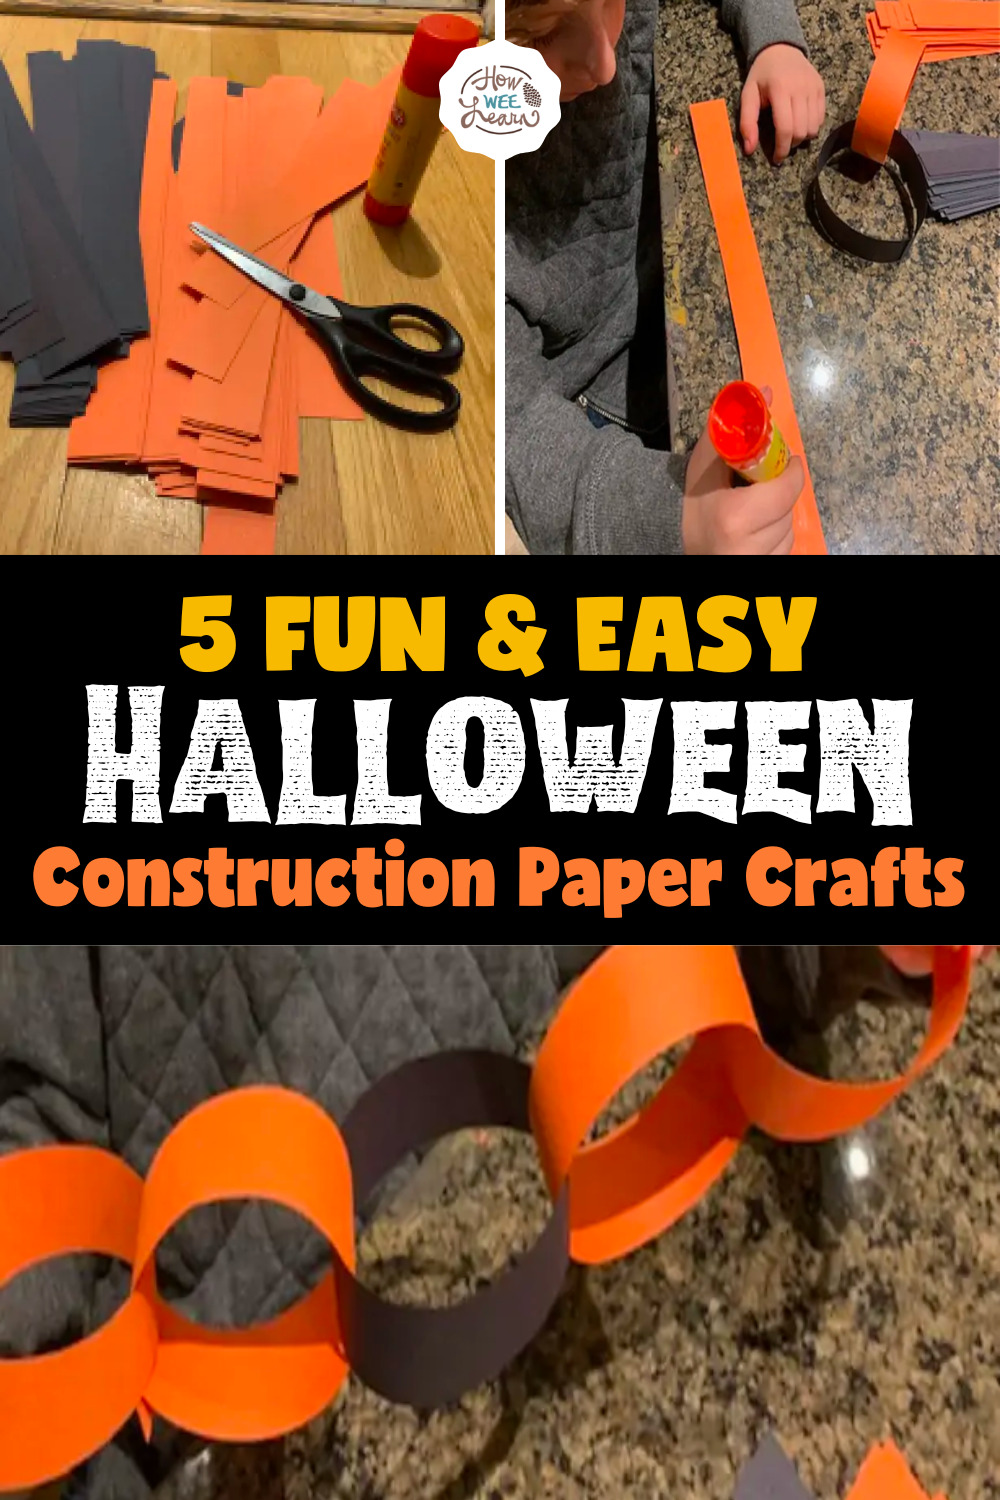 5 Fun & Easy Halloween Construction Paper Crafts